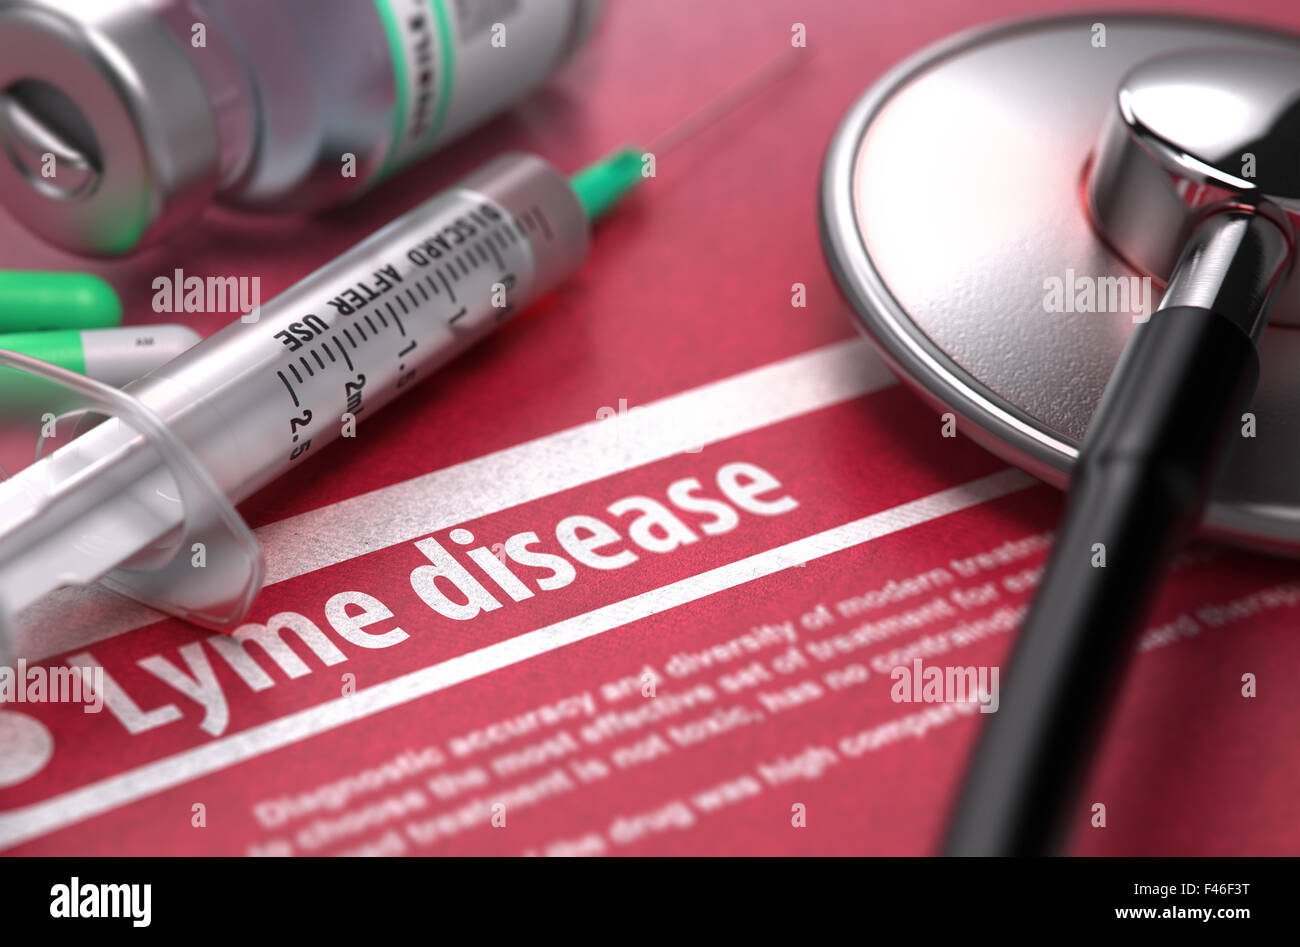 Lyme disease. Medical Concept on Red Background. Stock Photo